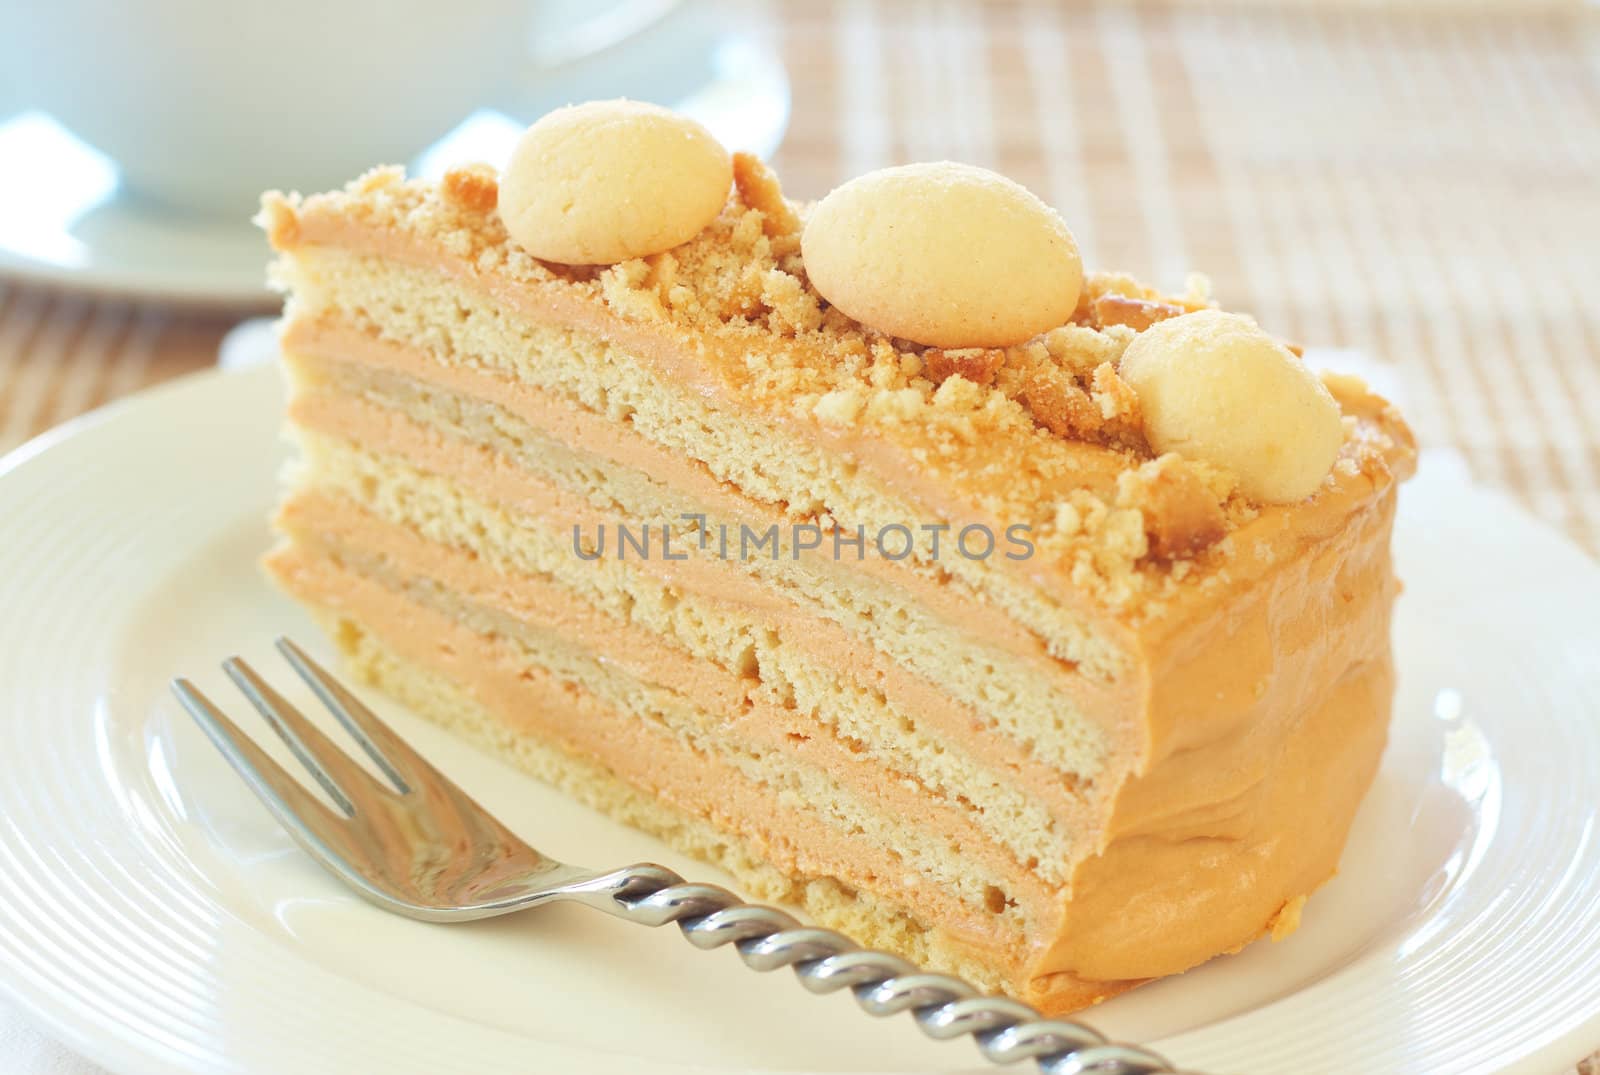 Caramel medovik cake made of honey and caramel cream, decorated with shortbread cookies on white plate